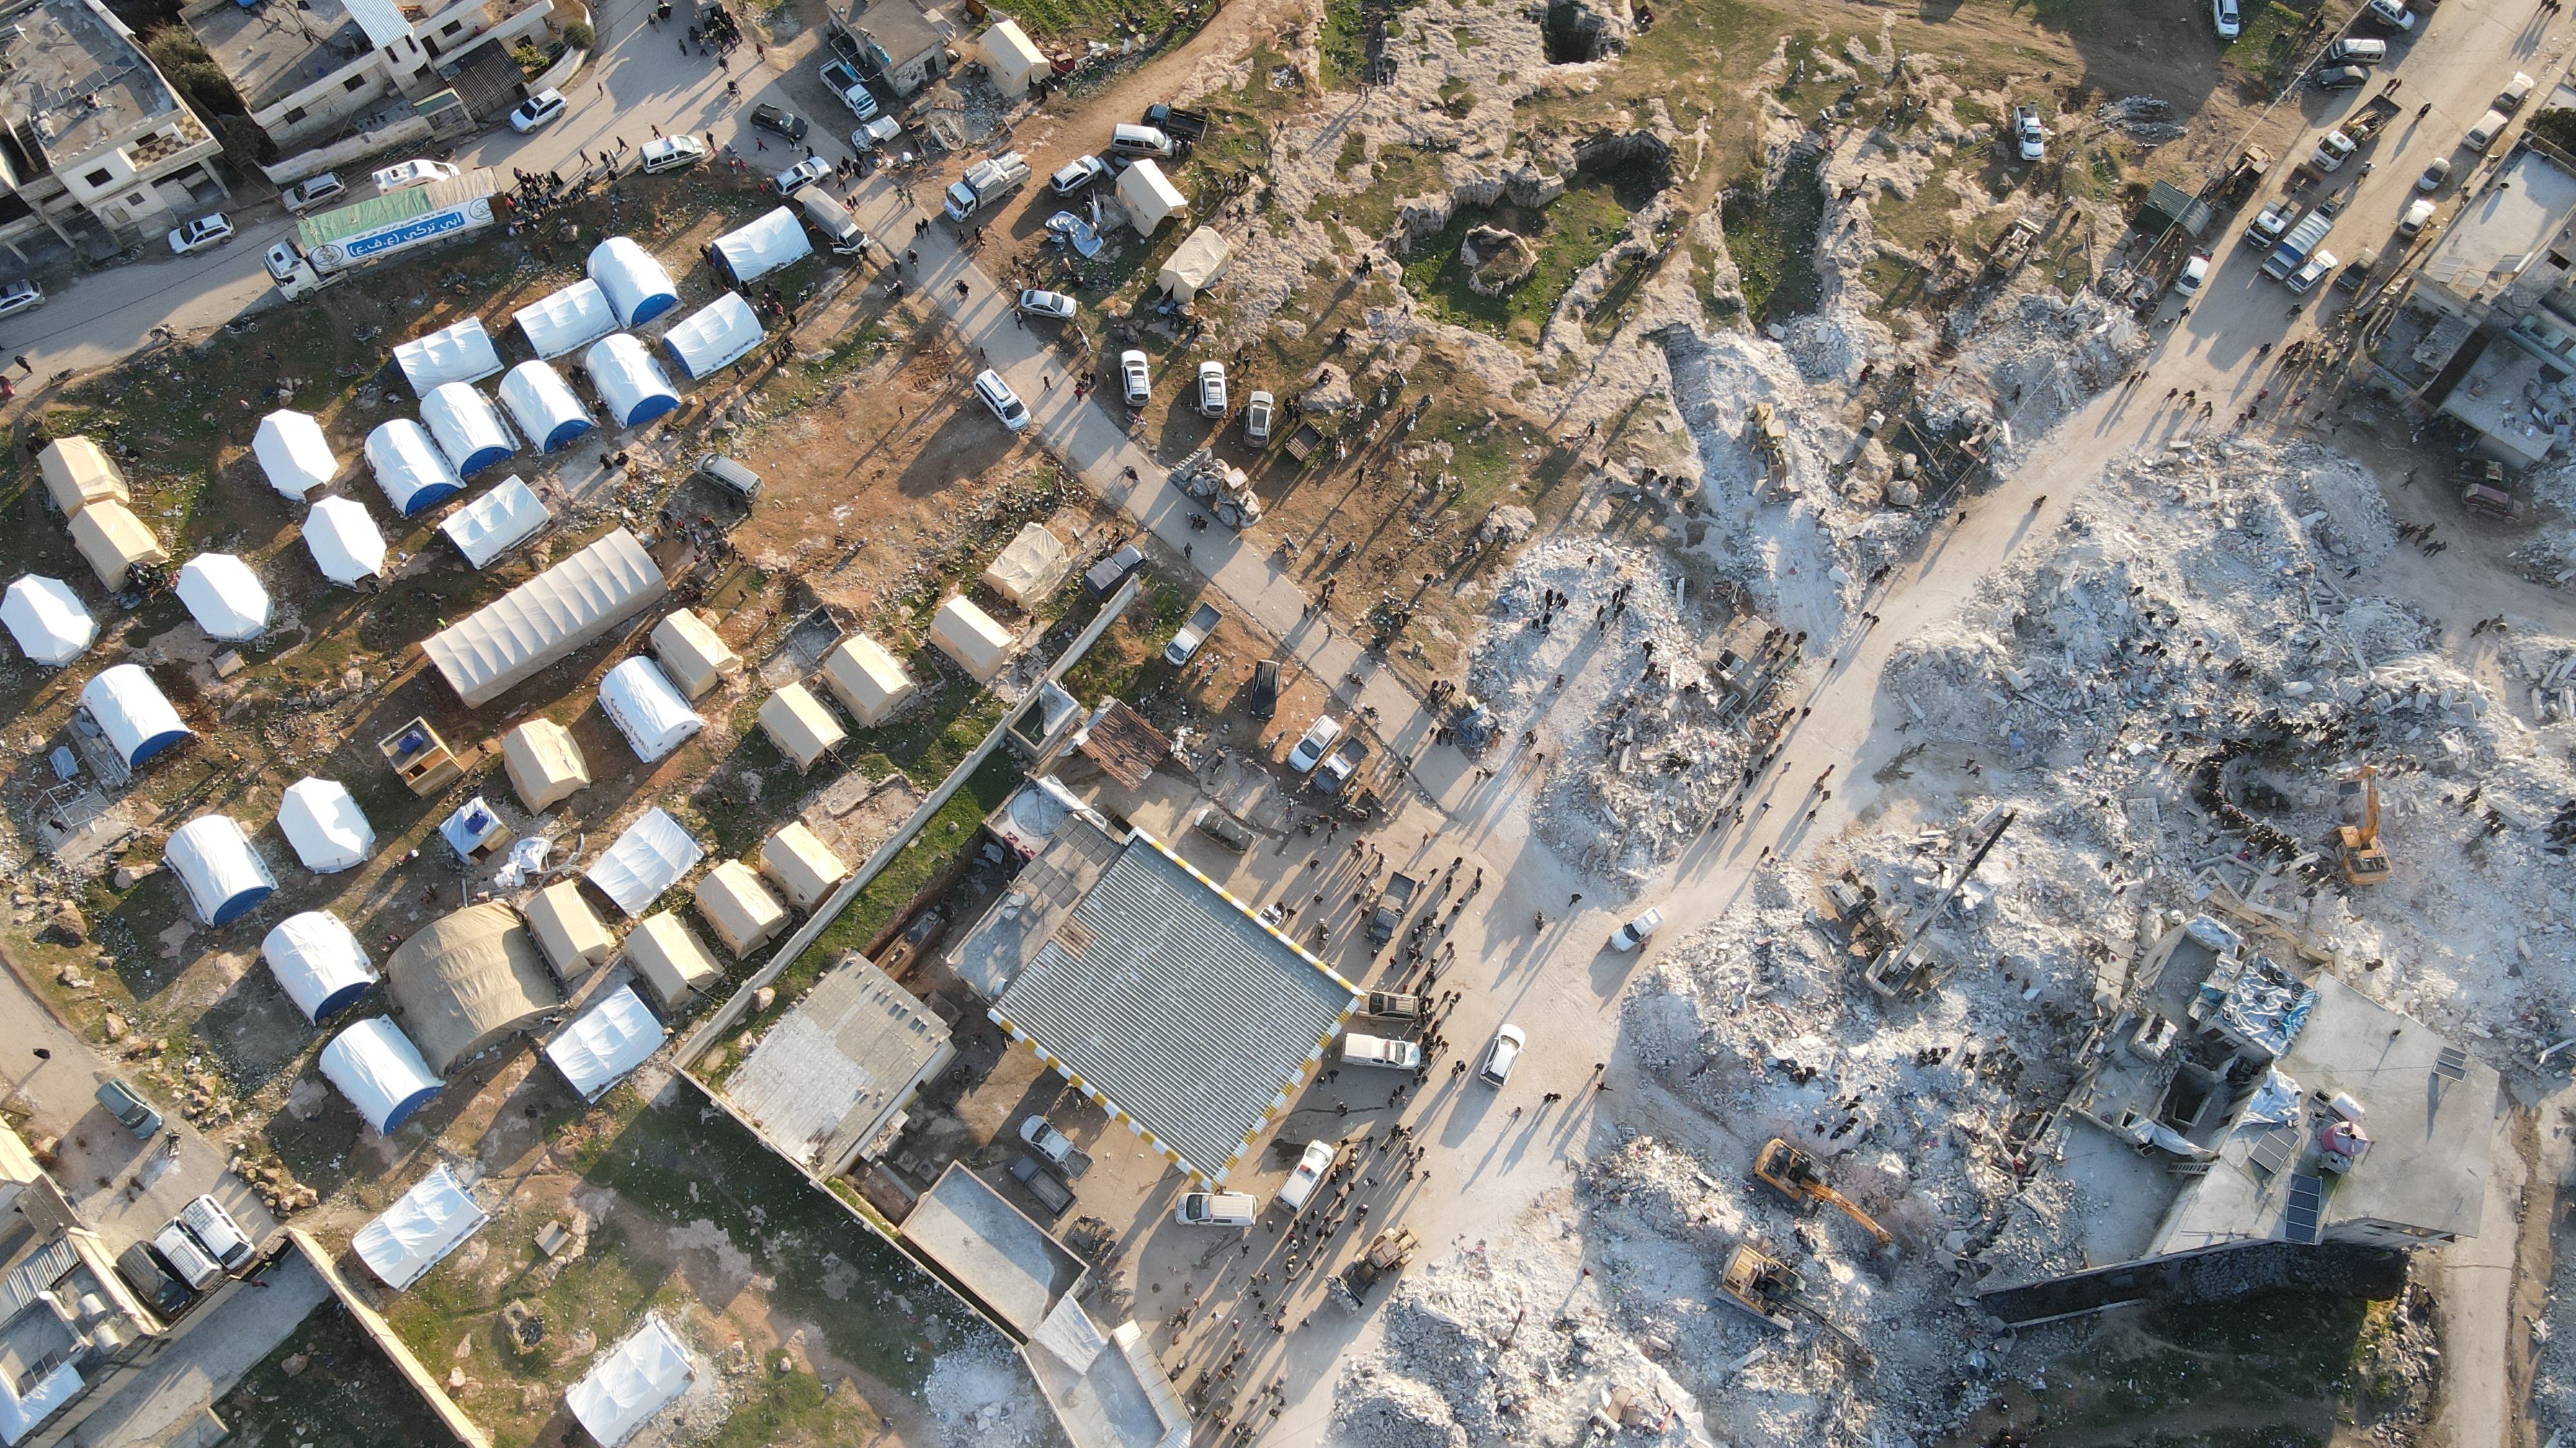 An aerial photo of the destruction in Haram city, western Idlib, on 12 February 2023. (MEE/Mohamed Al-Daher)